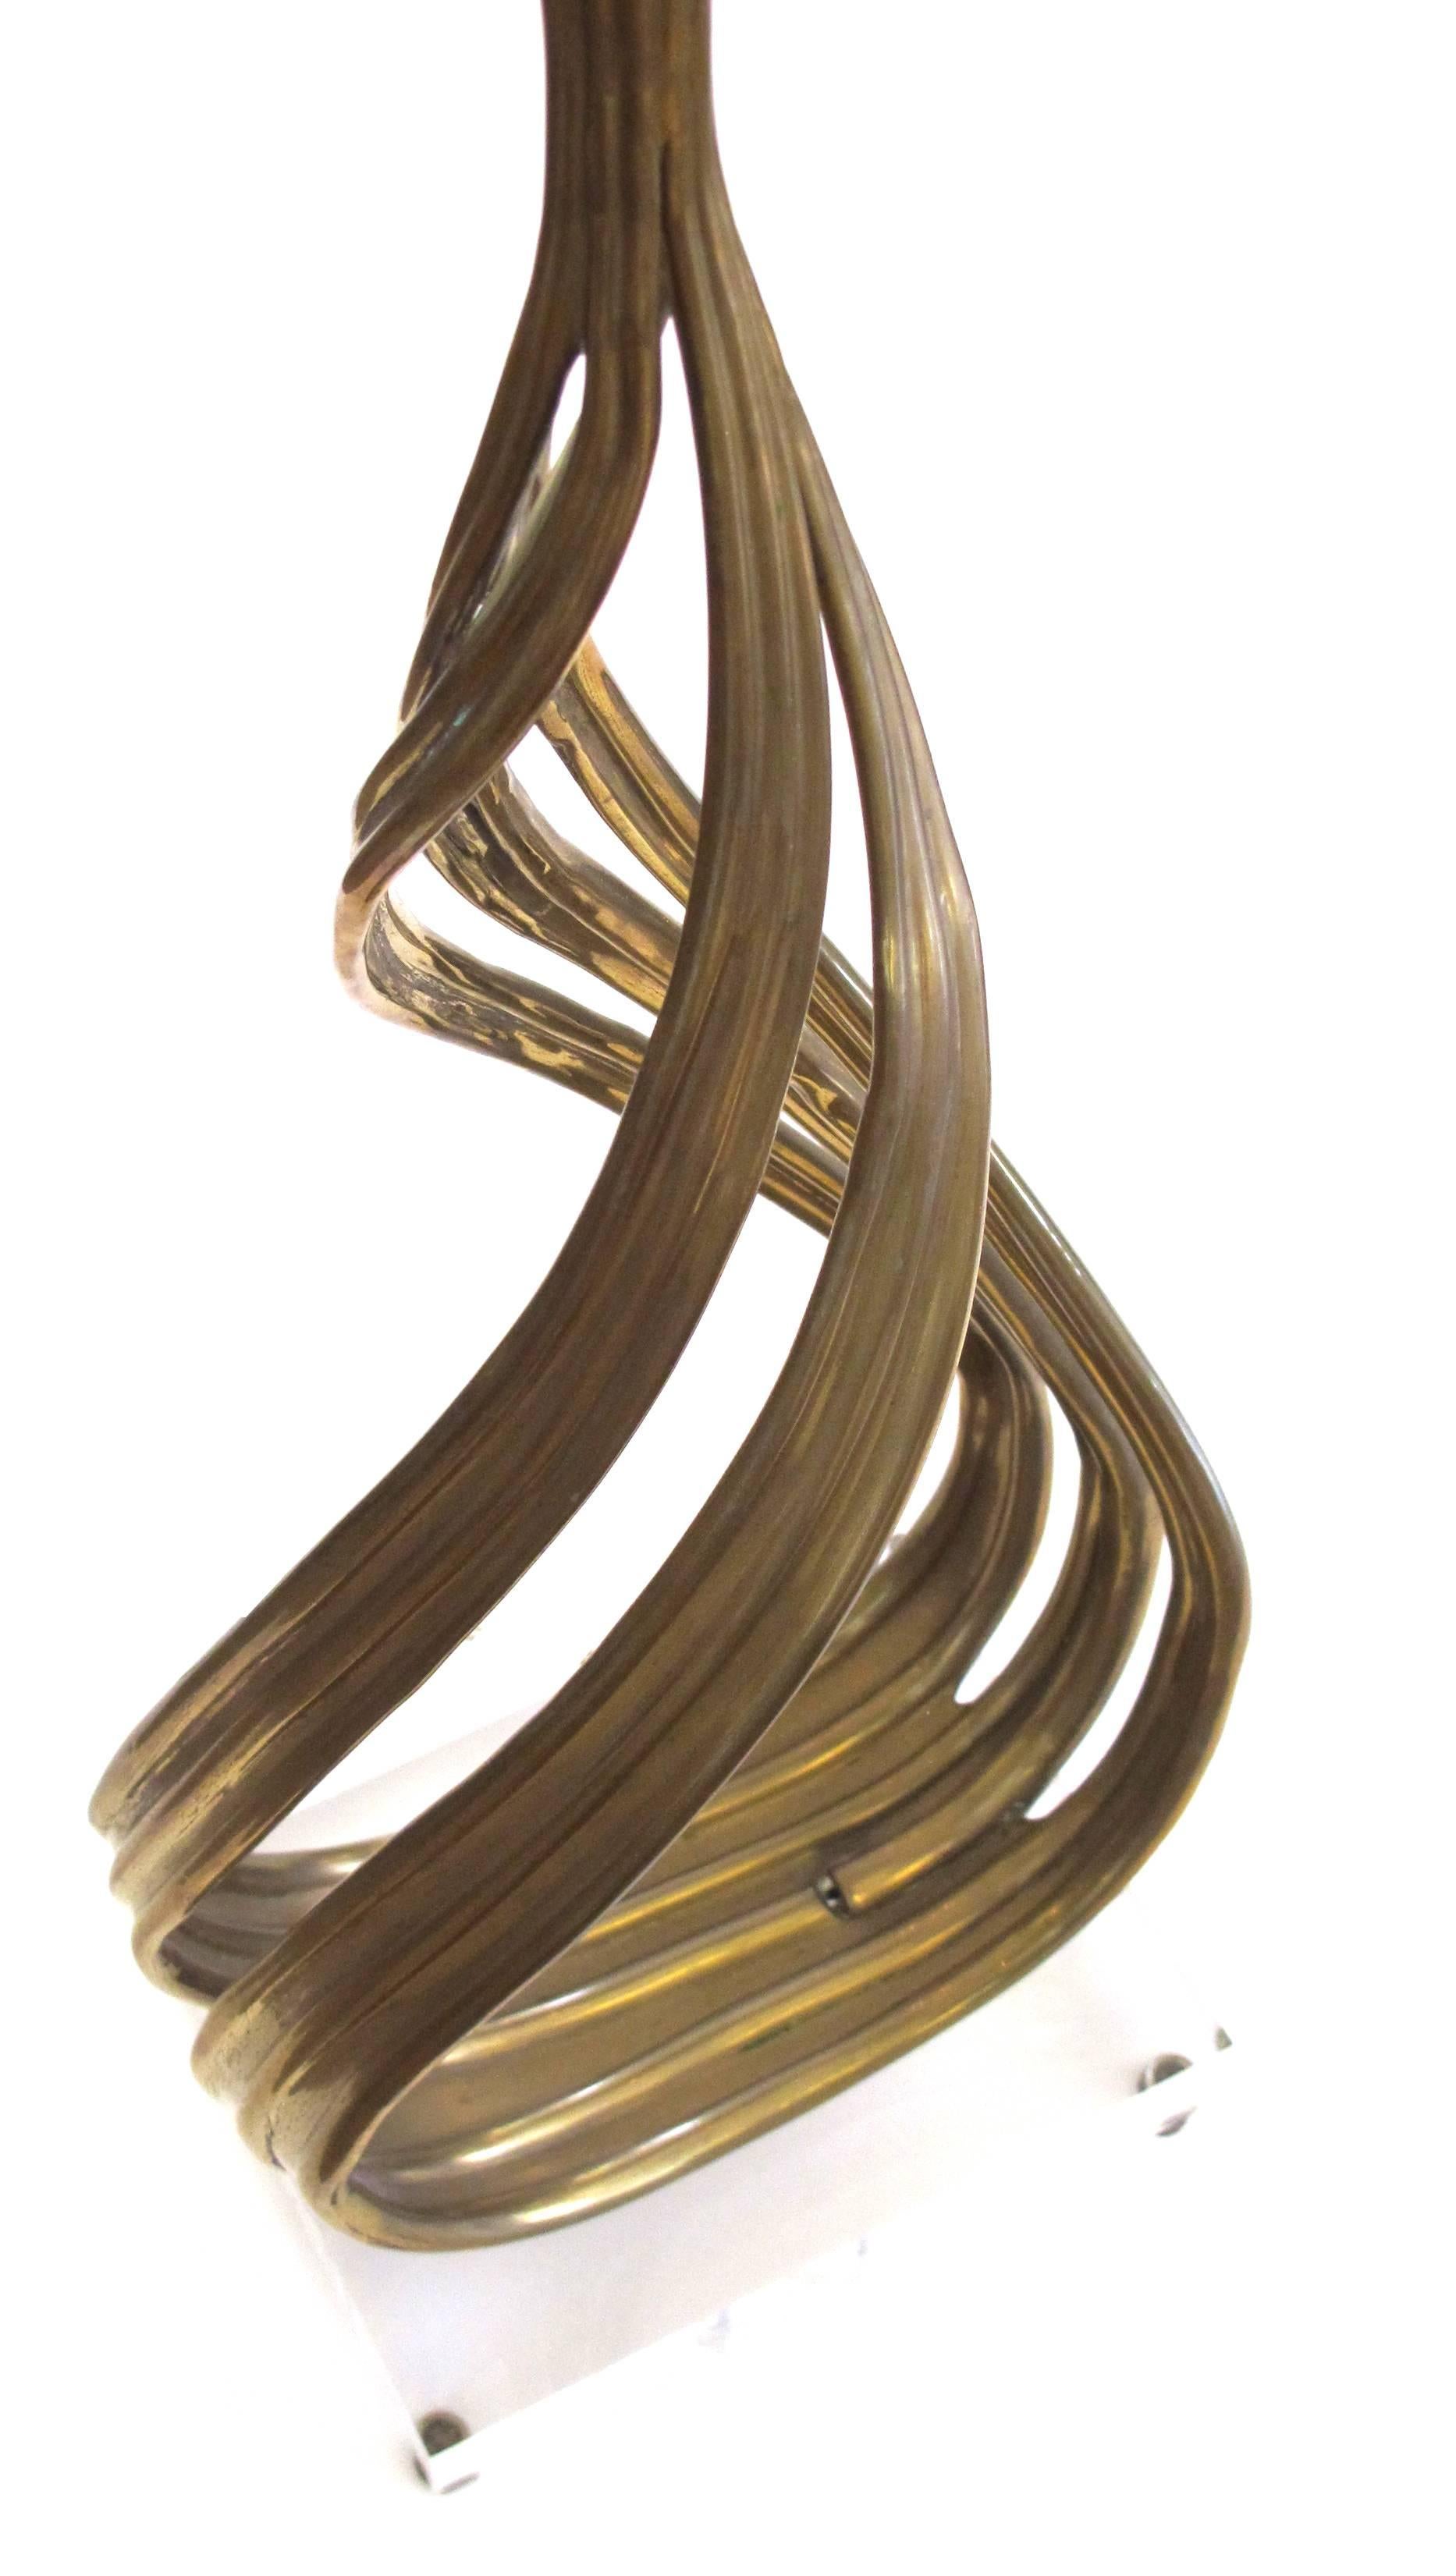 The teardrop shape consisting of brass tubing; resting on a Lucite base